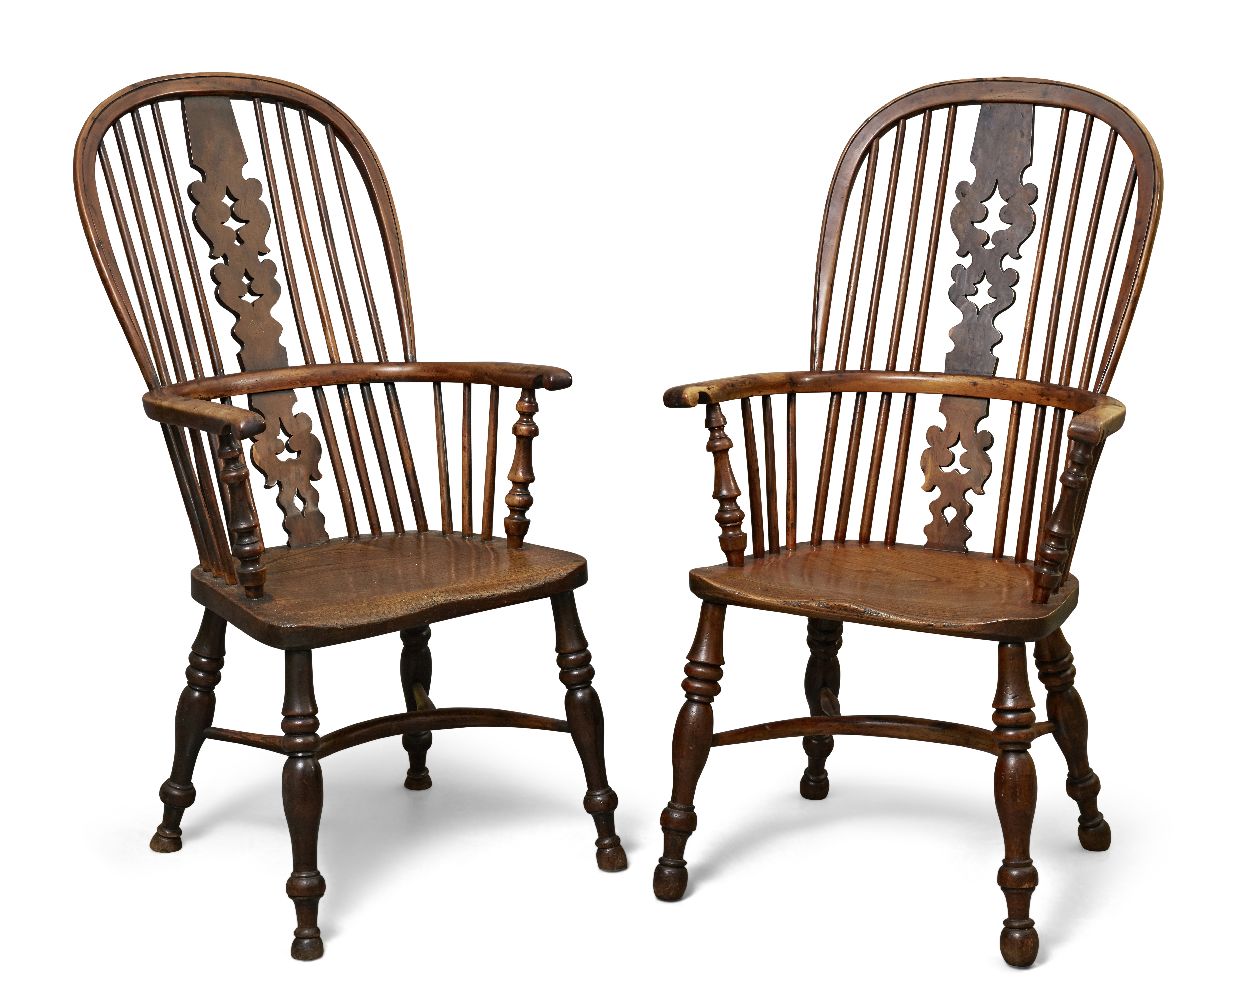 A pair of Victorian yew wood and elm Windsor armchairs, the high arching backs with turned